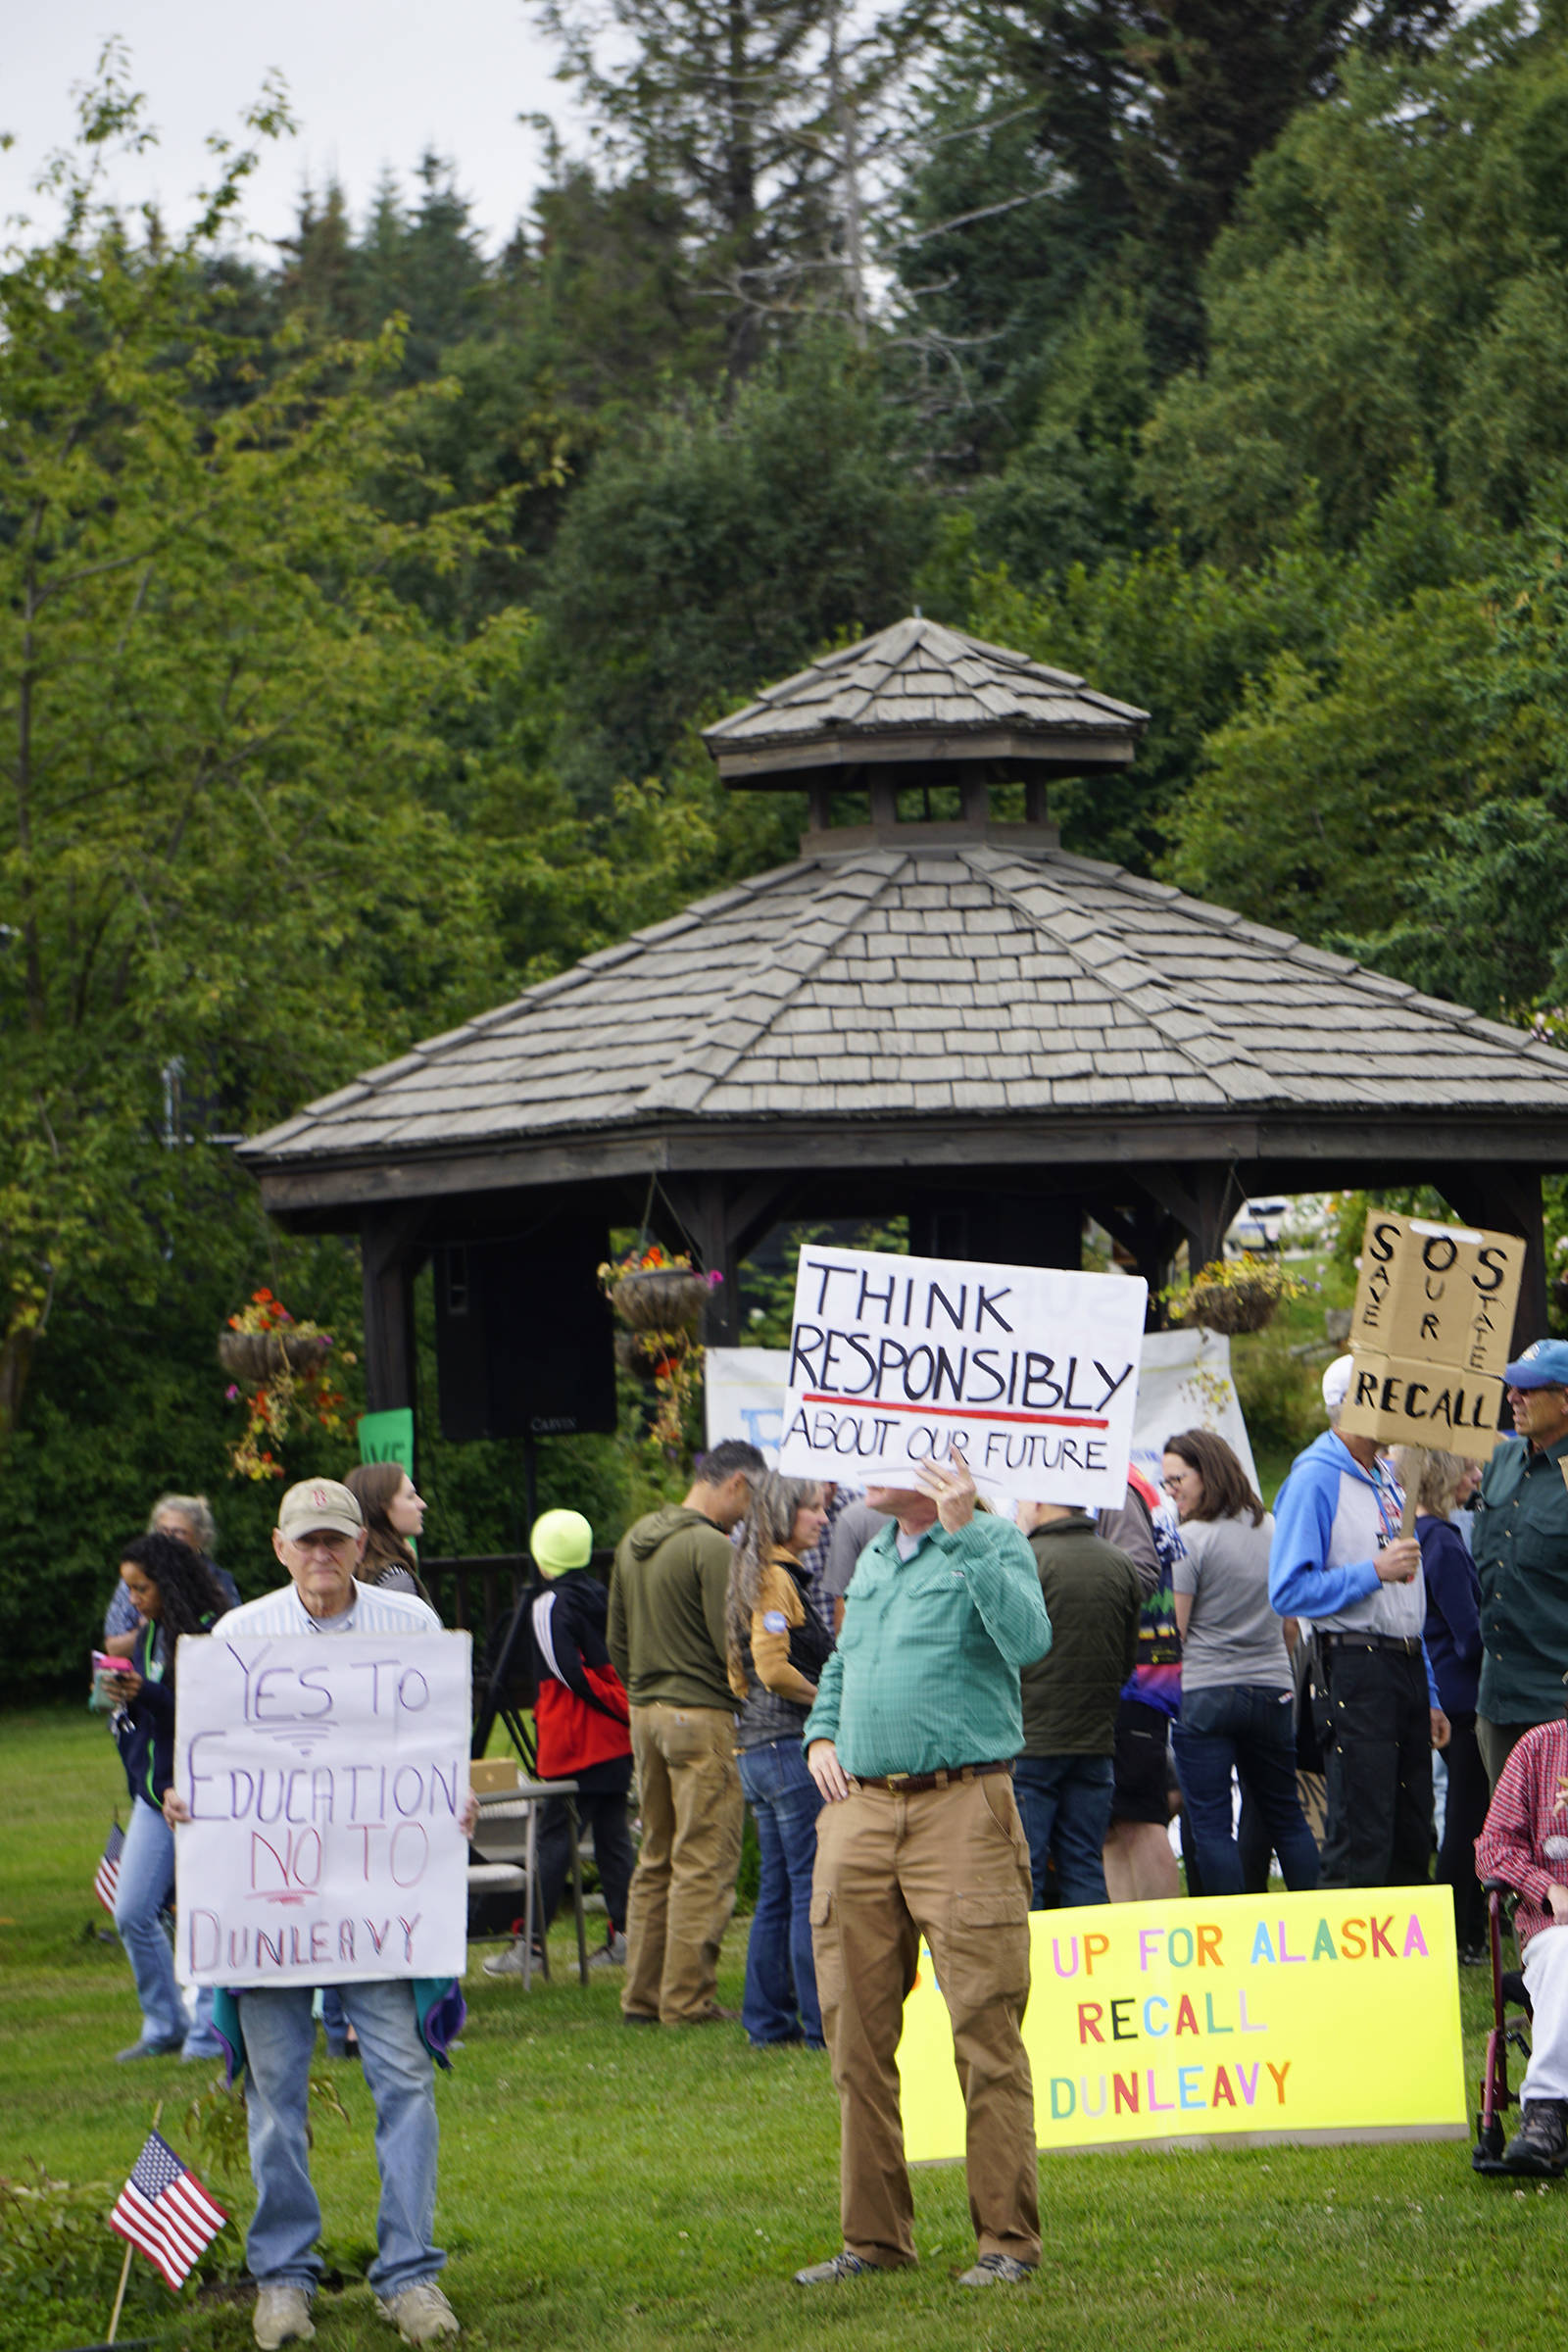 Recall Dunleavy supporters hold signs at a Recall Dunleavy rally held on Aug. 1, 2019, at WKFL Park in Homer, Alaska. (Photo by Michael Armstrong)